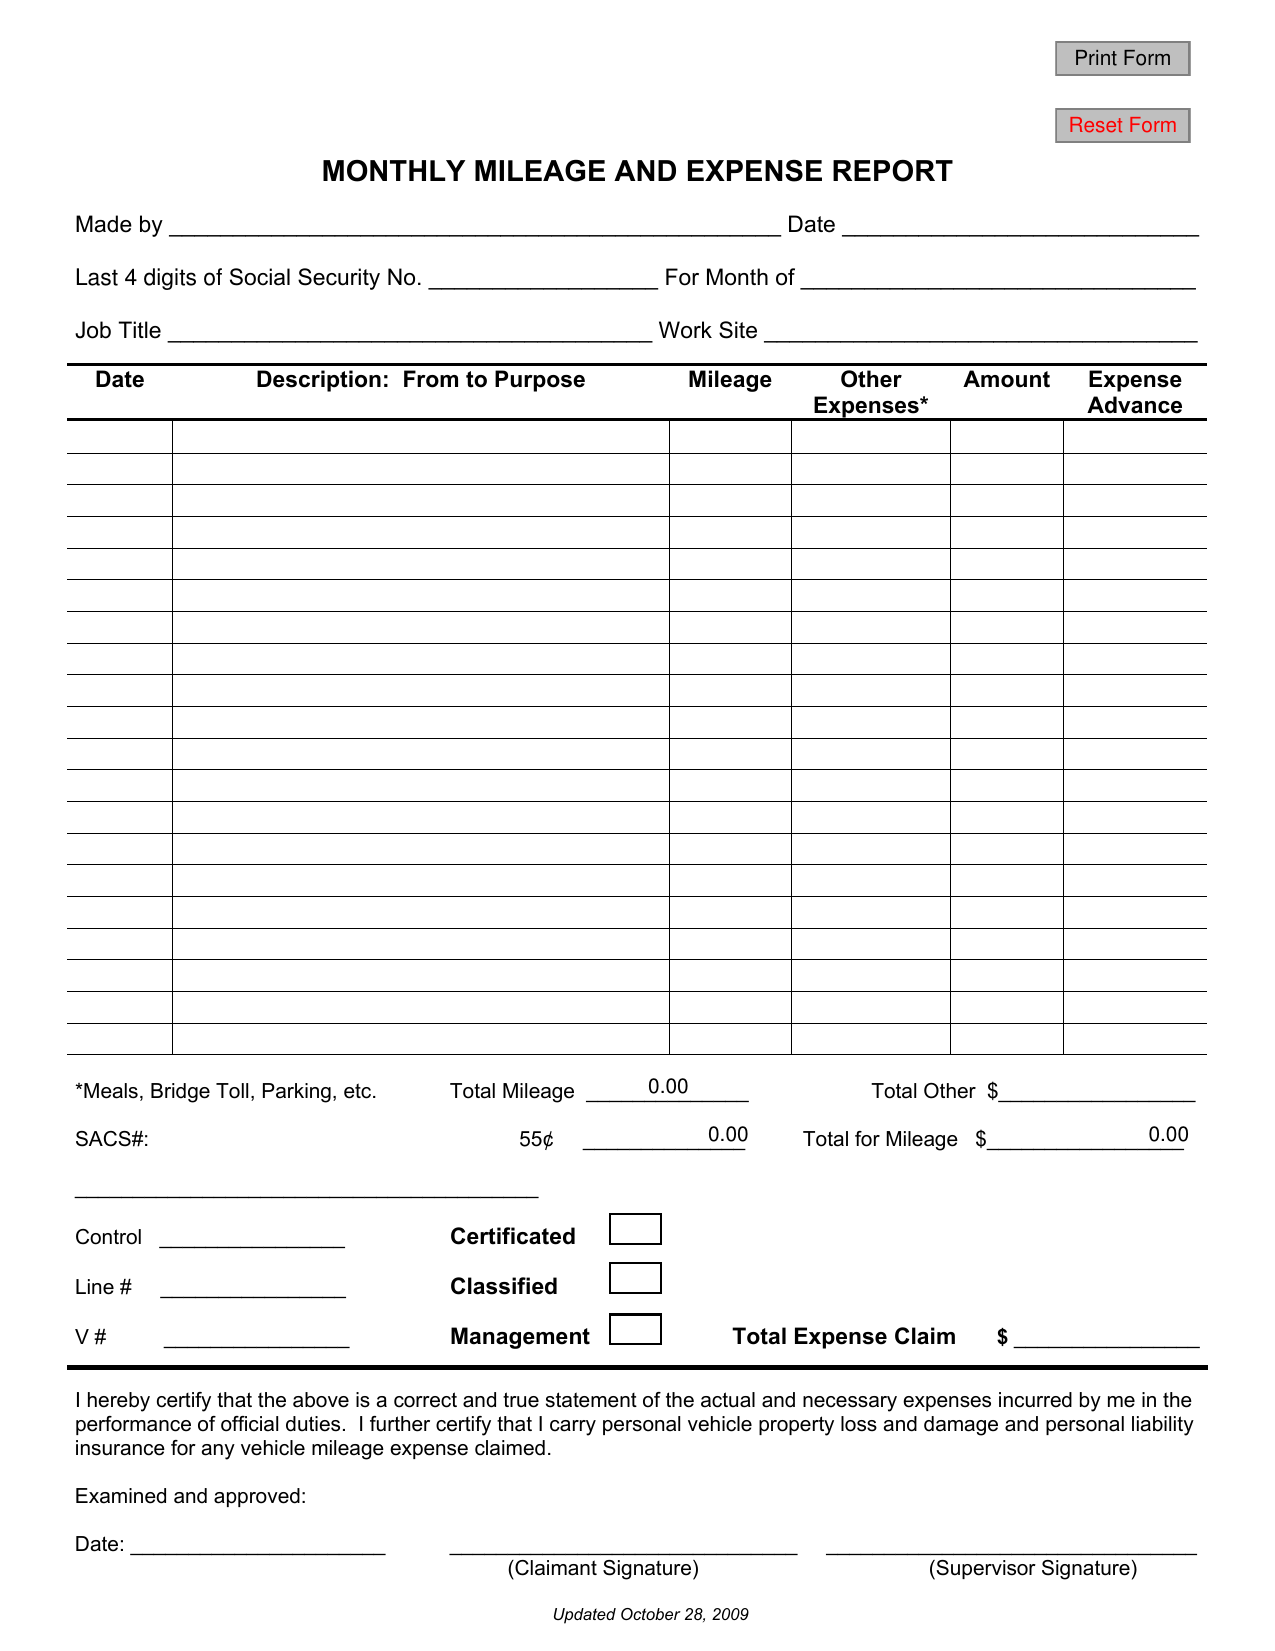 Download Mileage Expense Report Form PDF FreeDownloads net